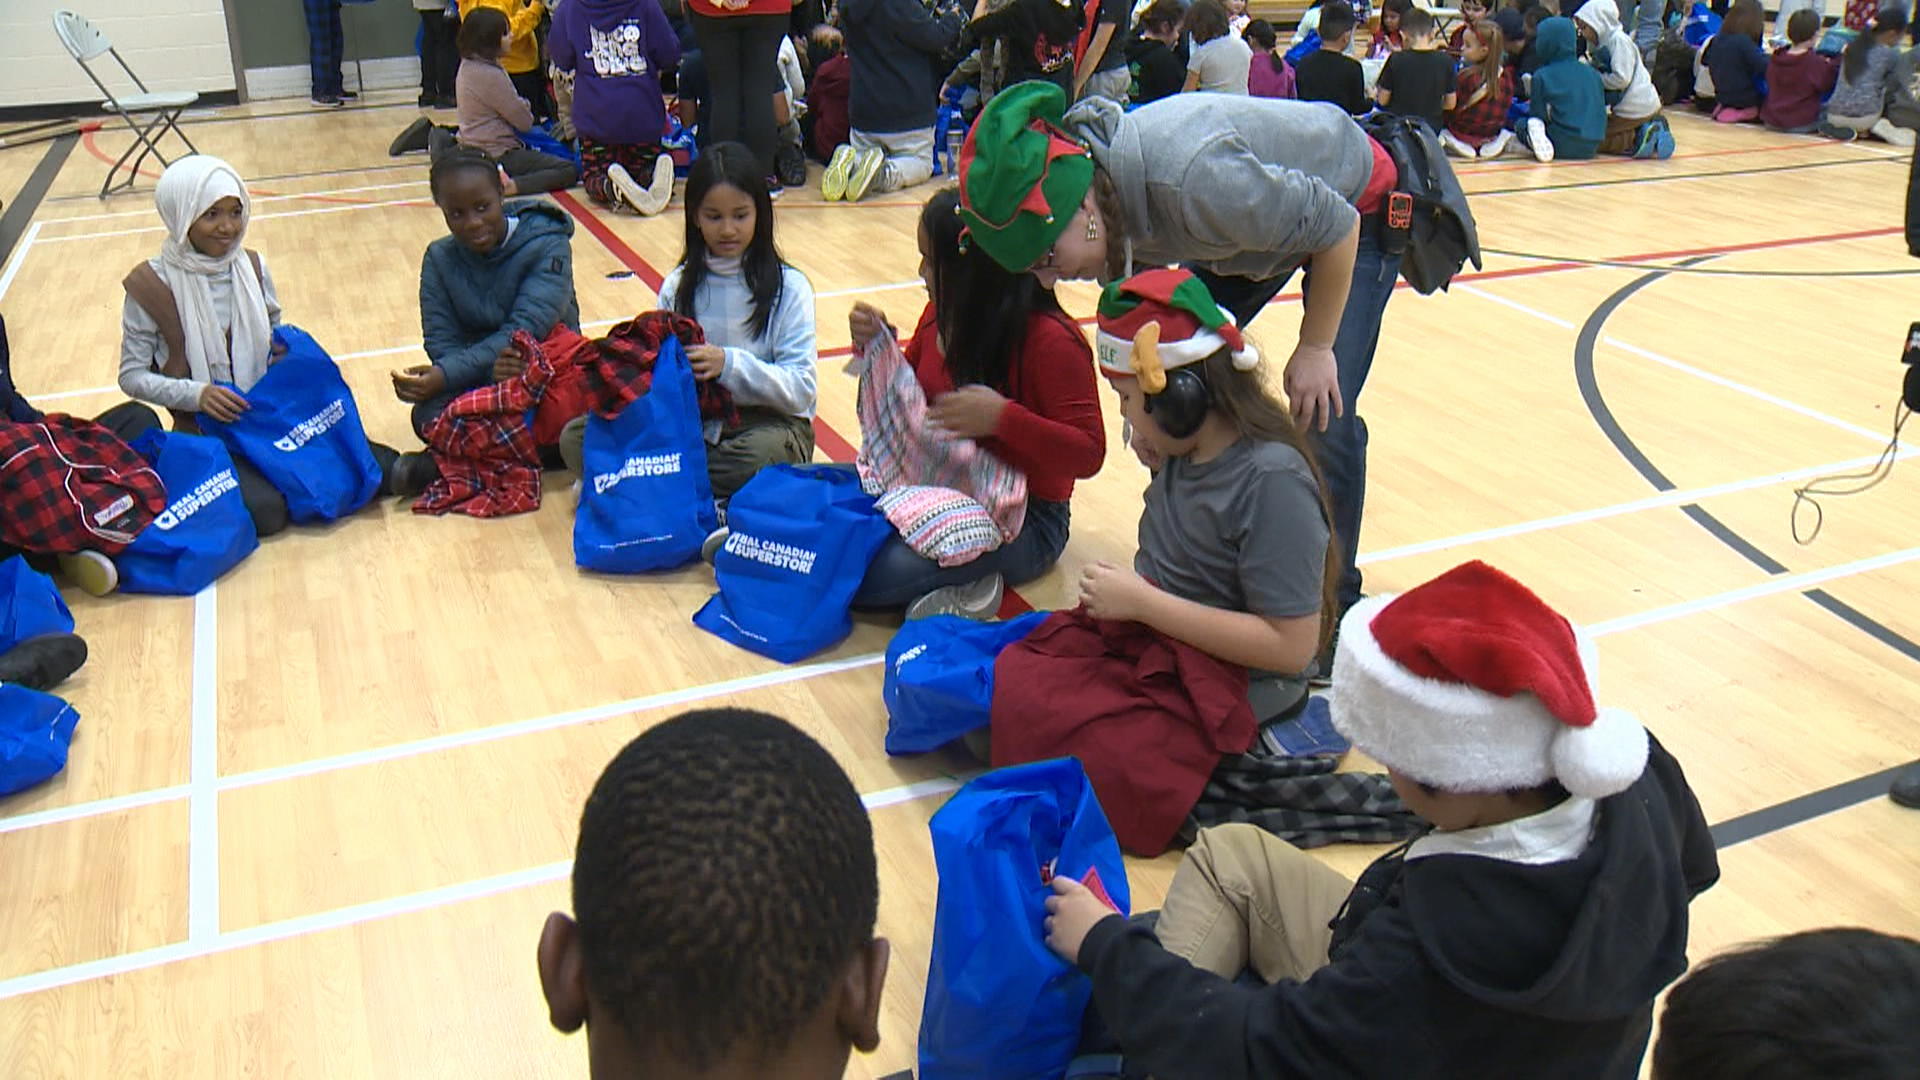 River Elm School students gifted pyjamas thanks to community donations